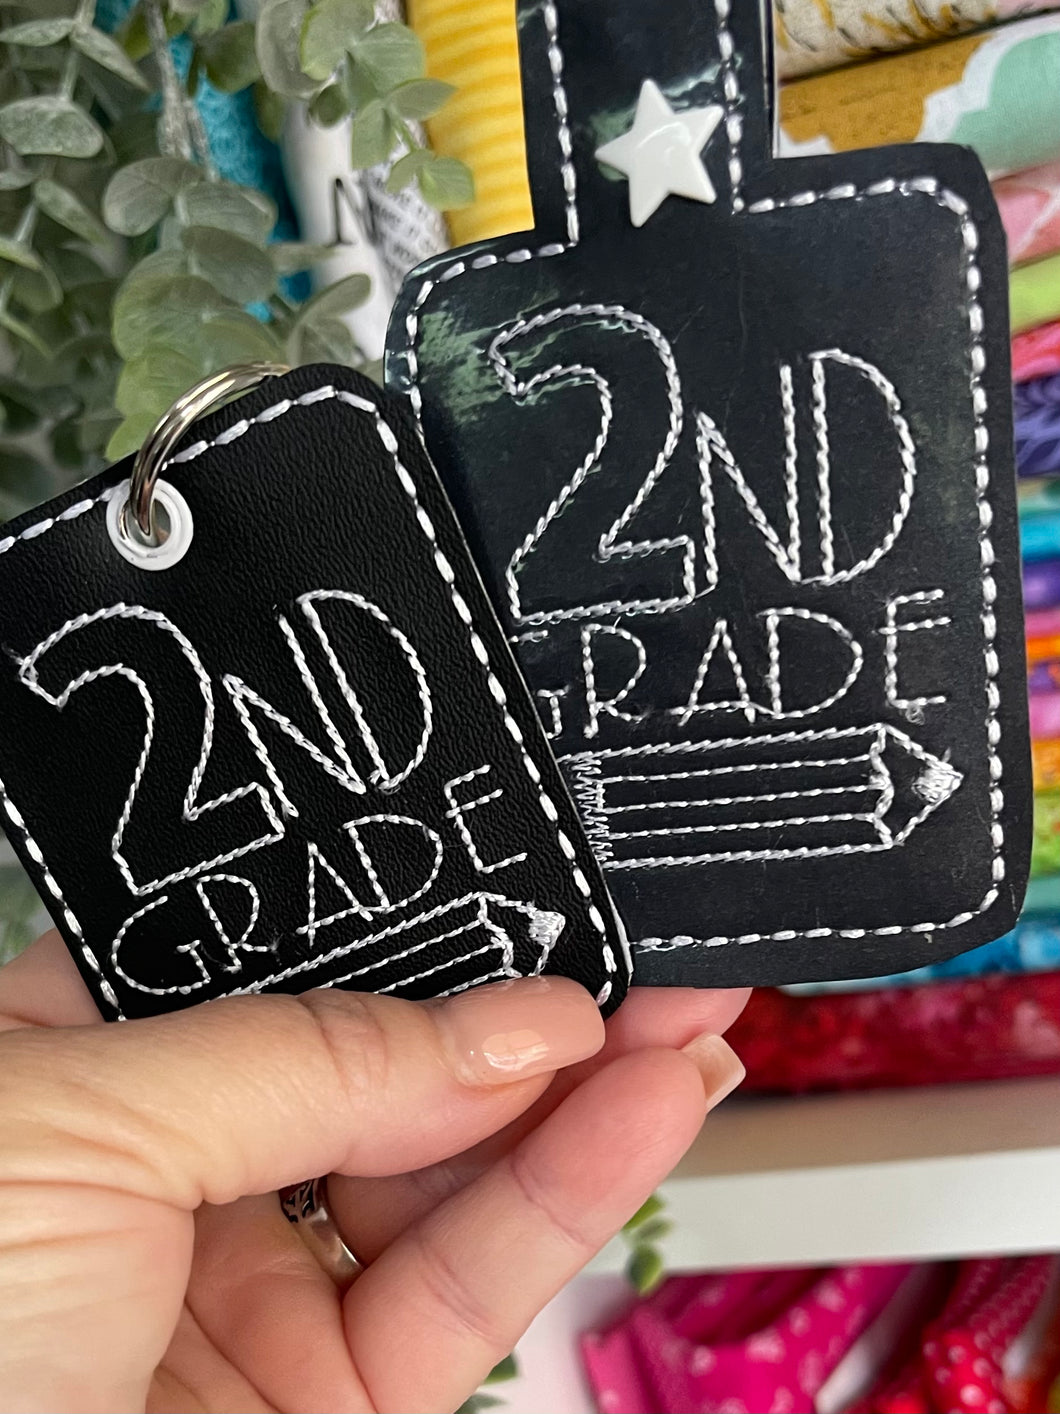 Grade School Tags and Eyelets - 2nd Grade- 4x4 and 5x7 Hoops - 4 Designs Included